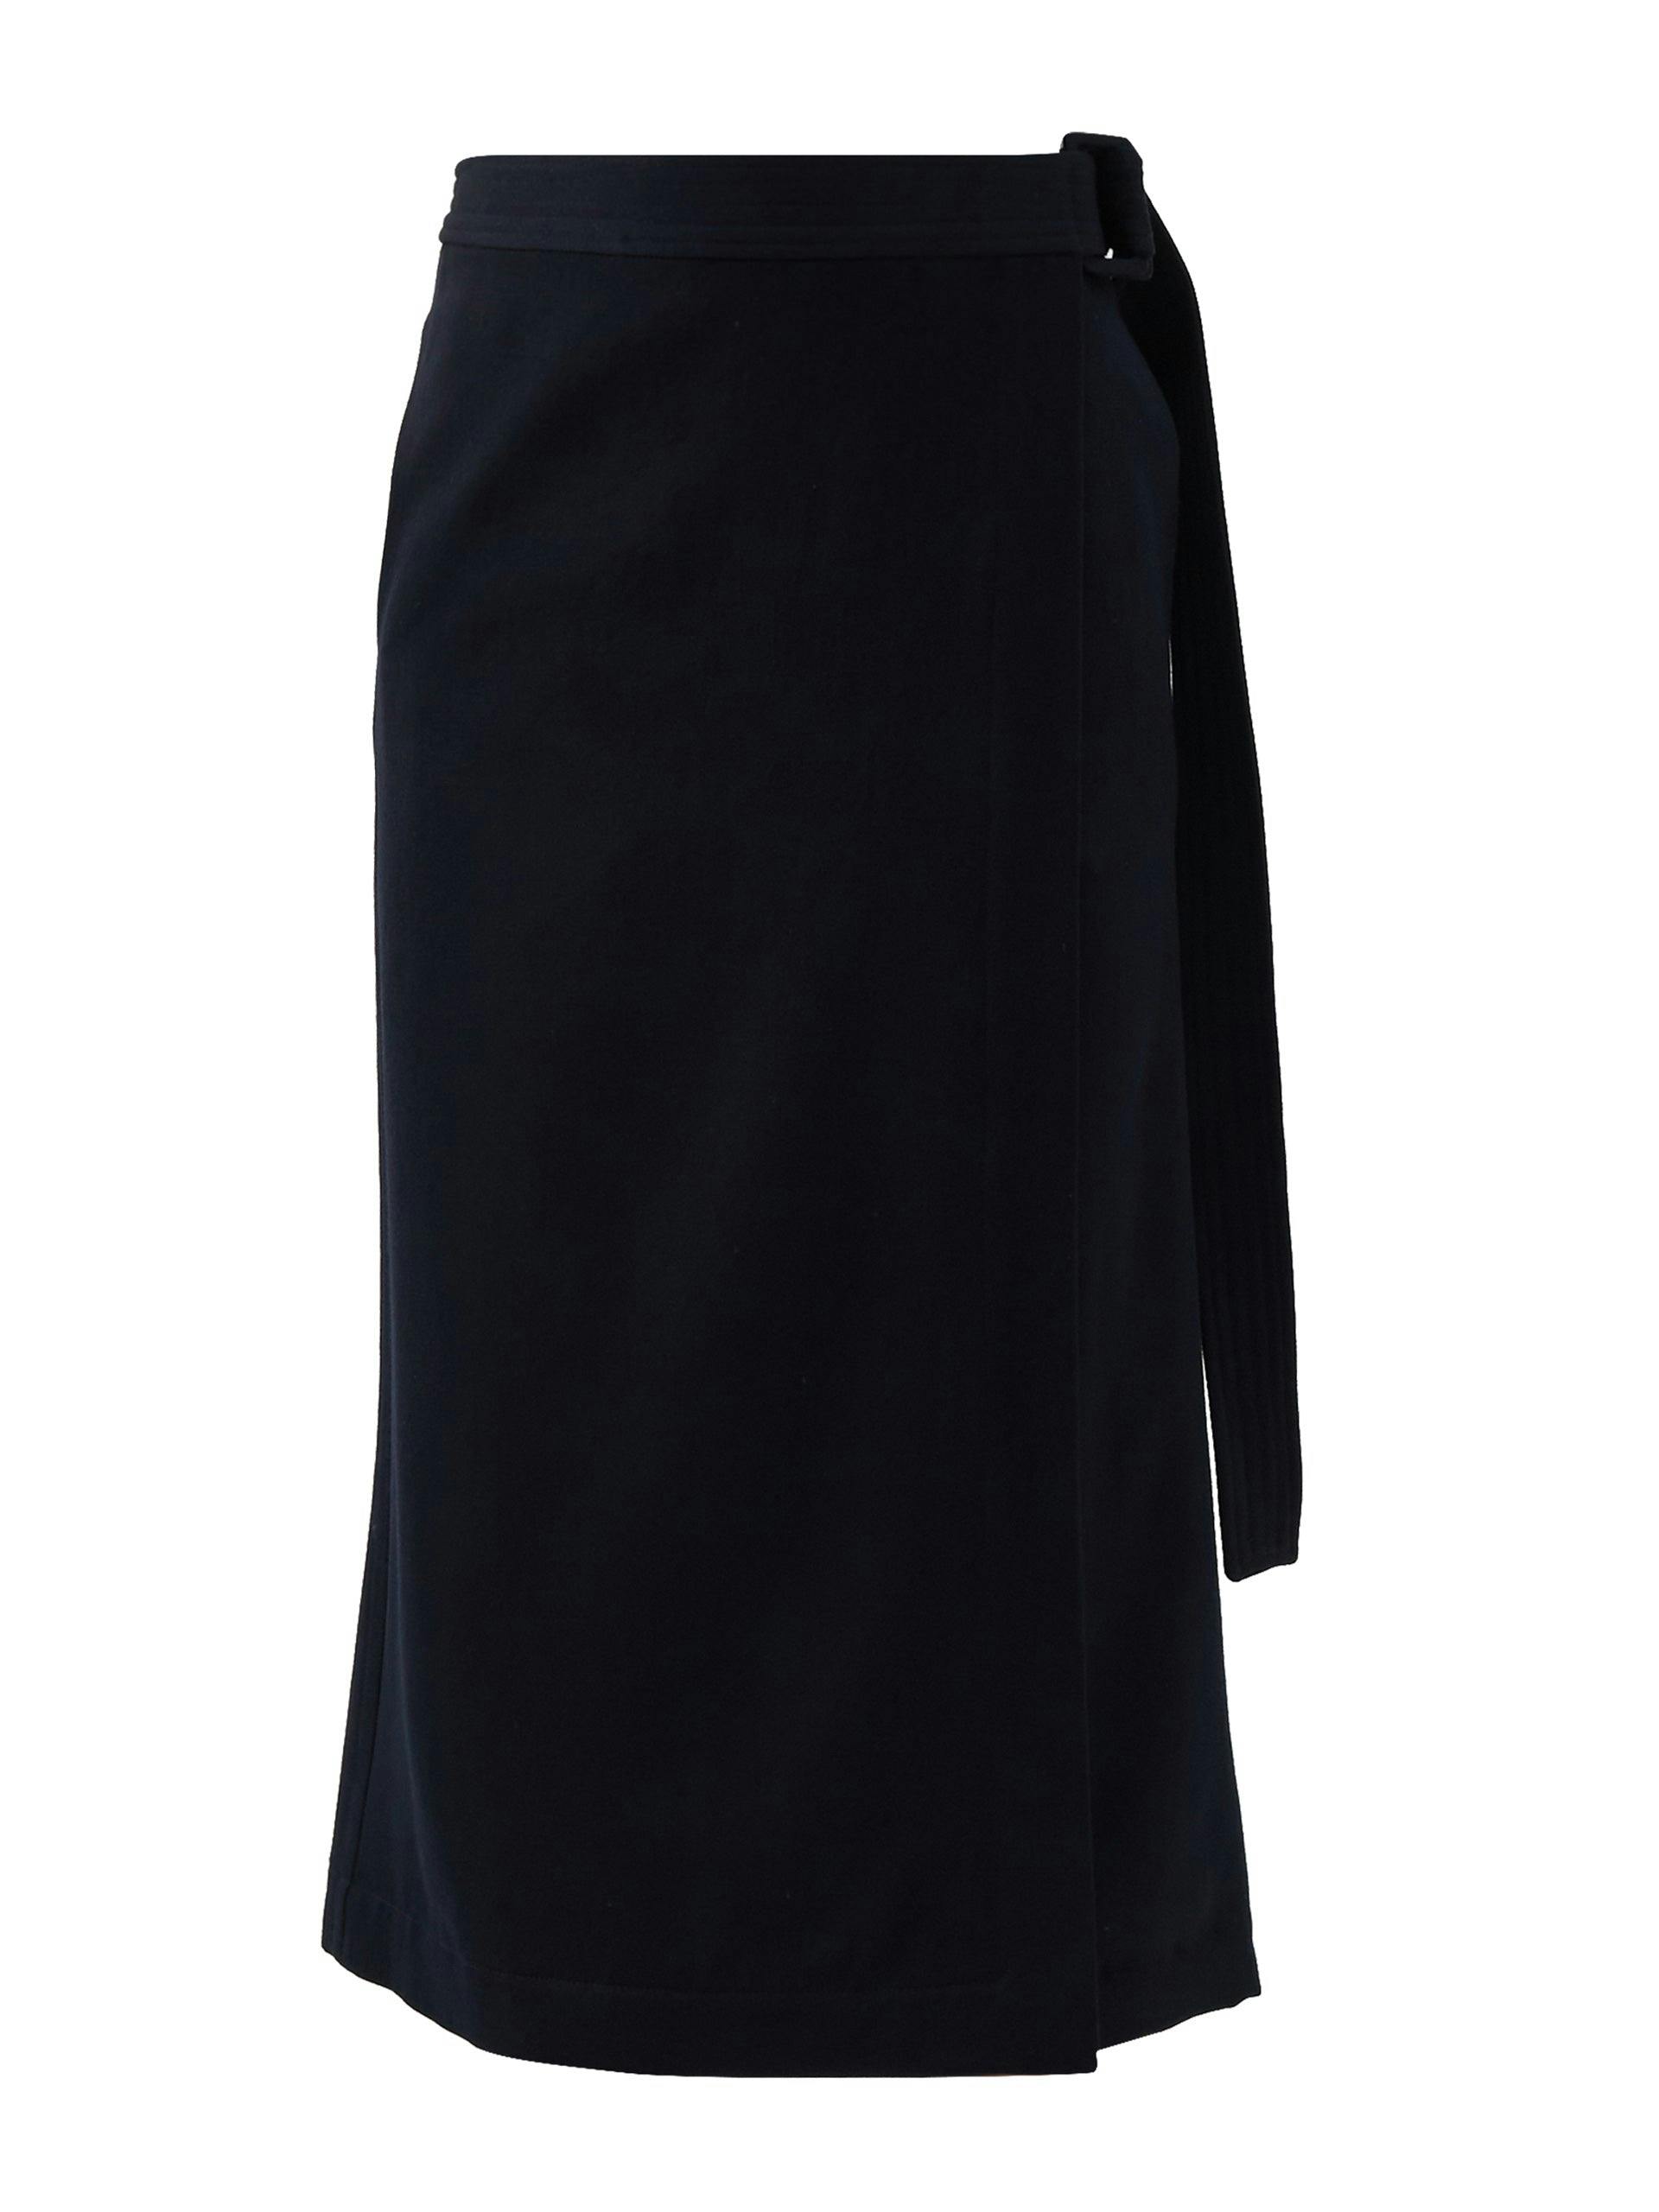 Navy belted wool wrap skirt